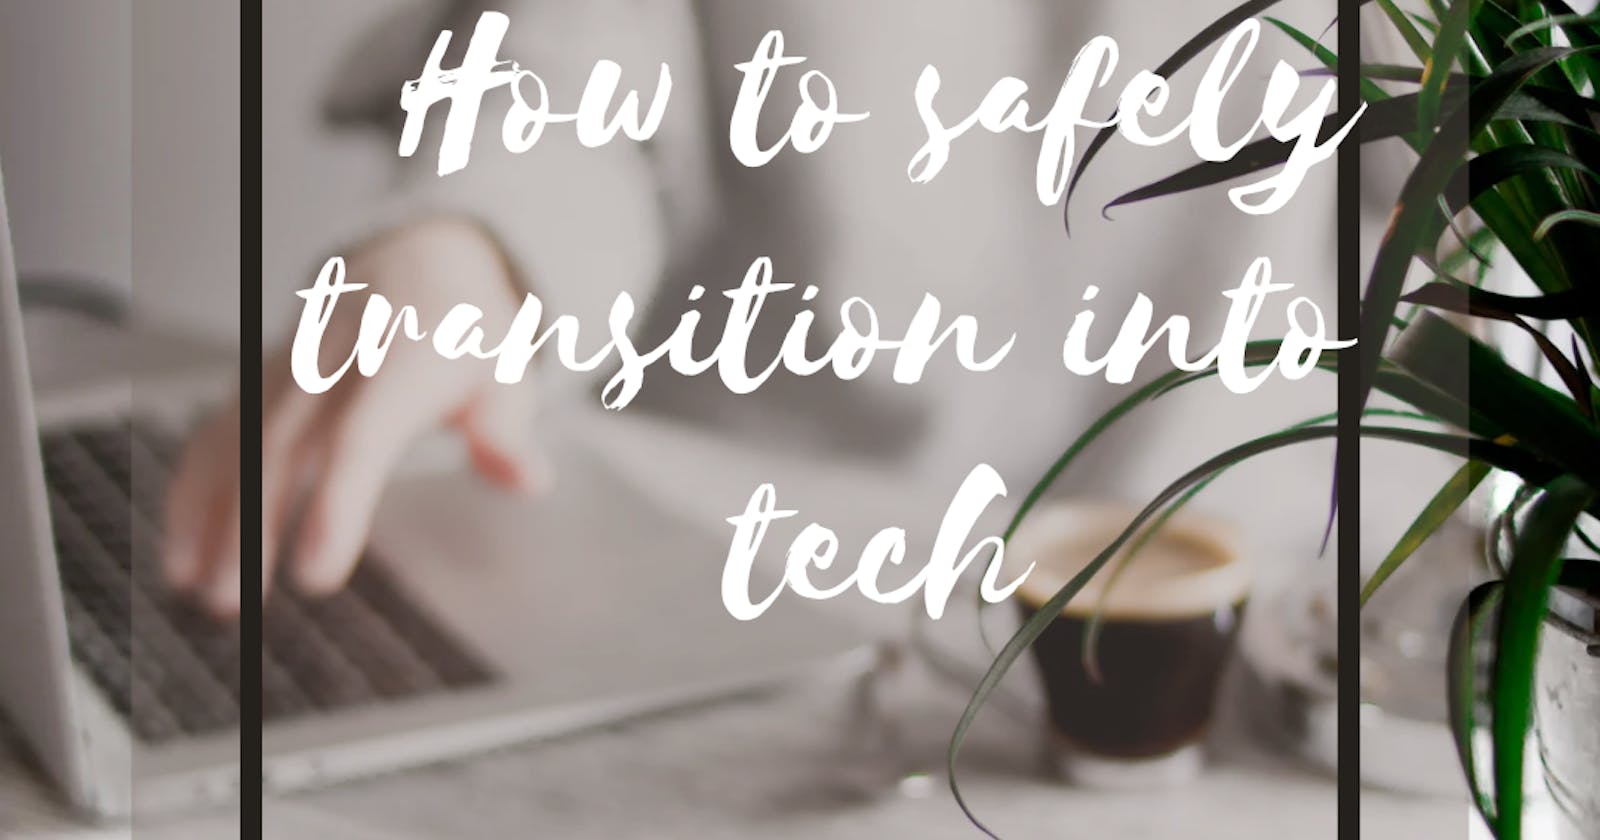 How To Safely Transition Into Tech